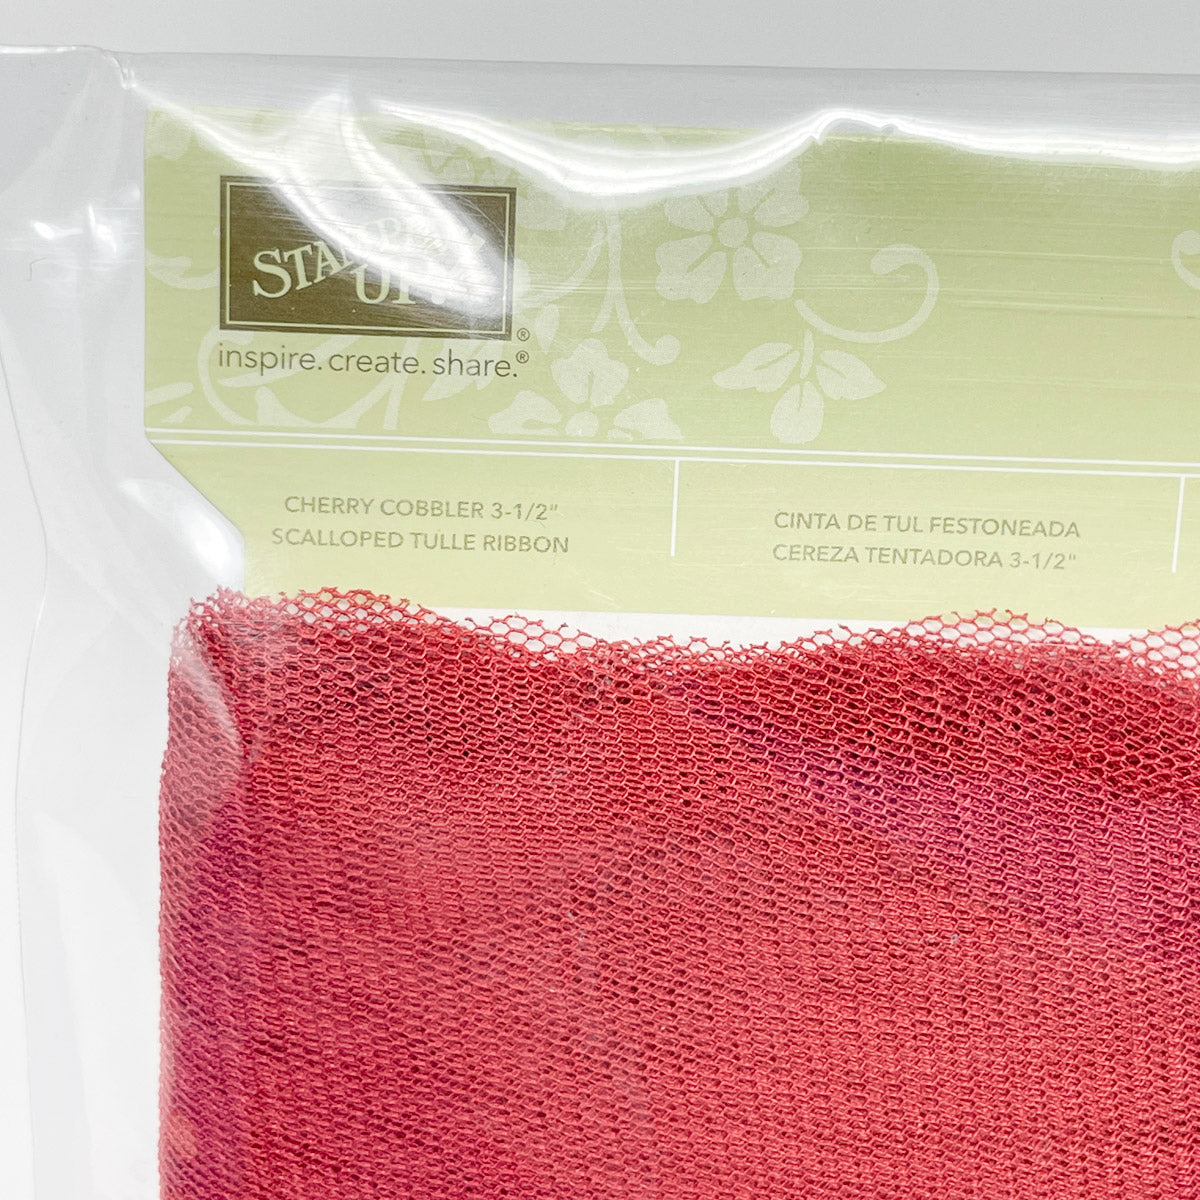 Stampin' Up Scalloped Tulle Ribbon - 3 1/2" - Cherry Cobbler